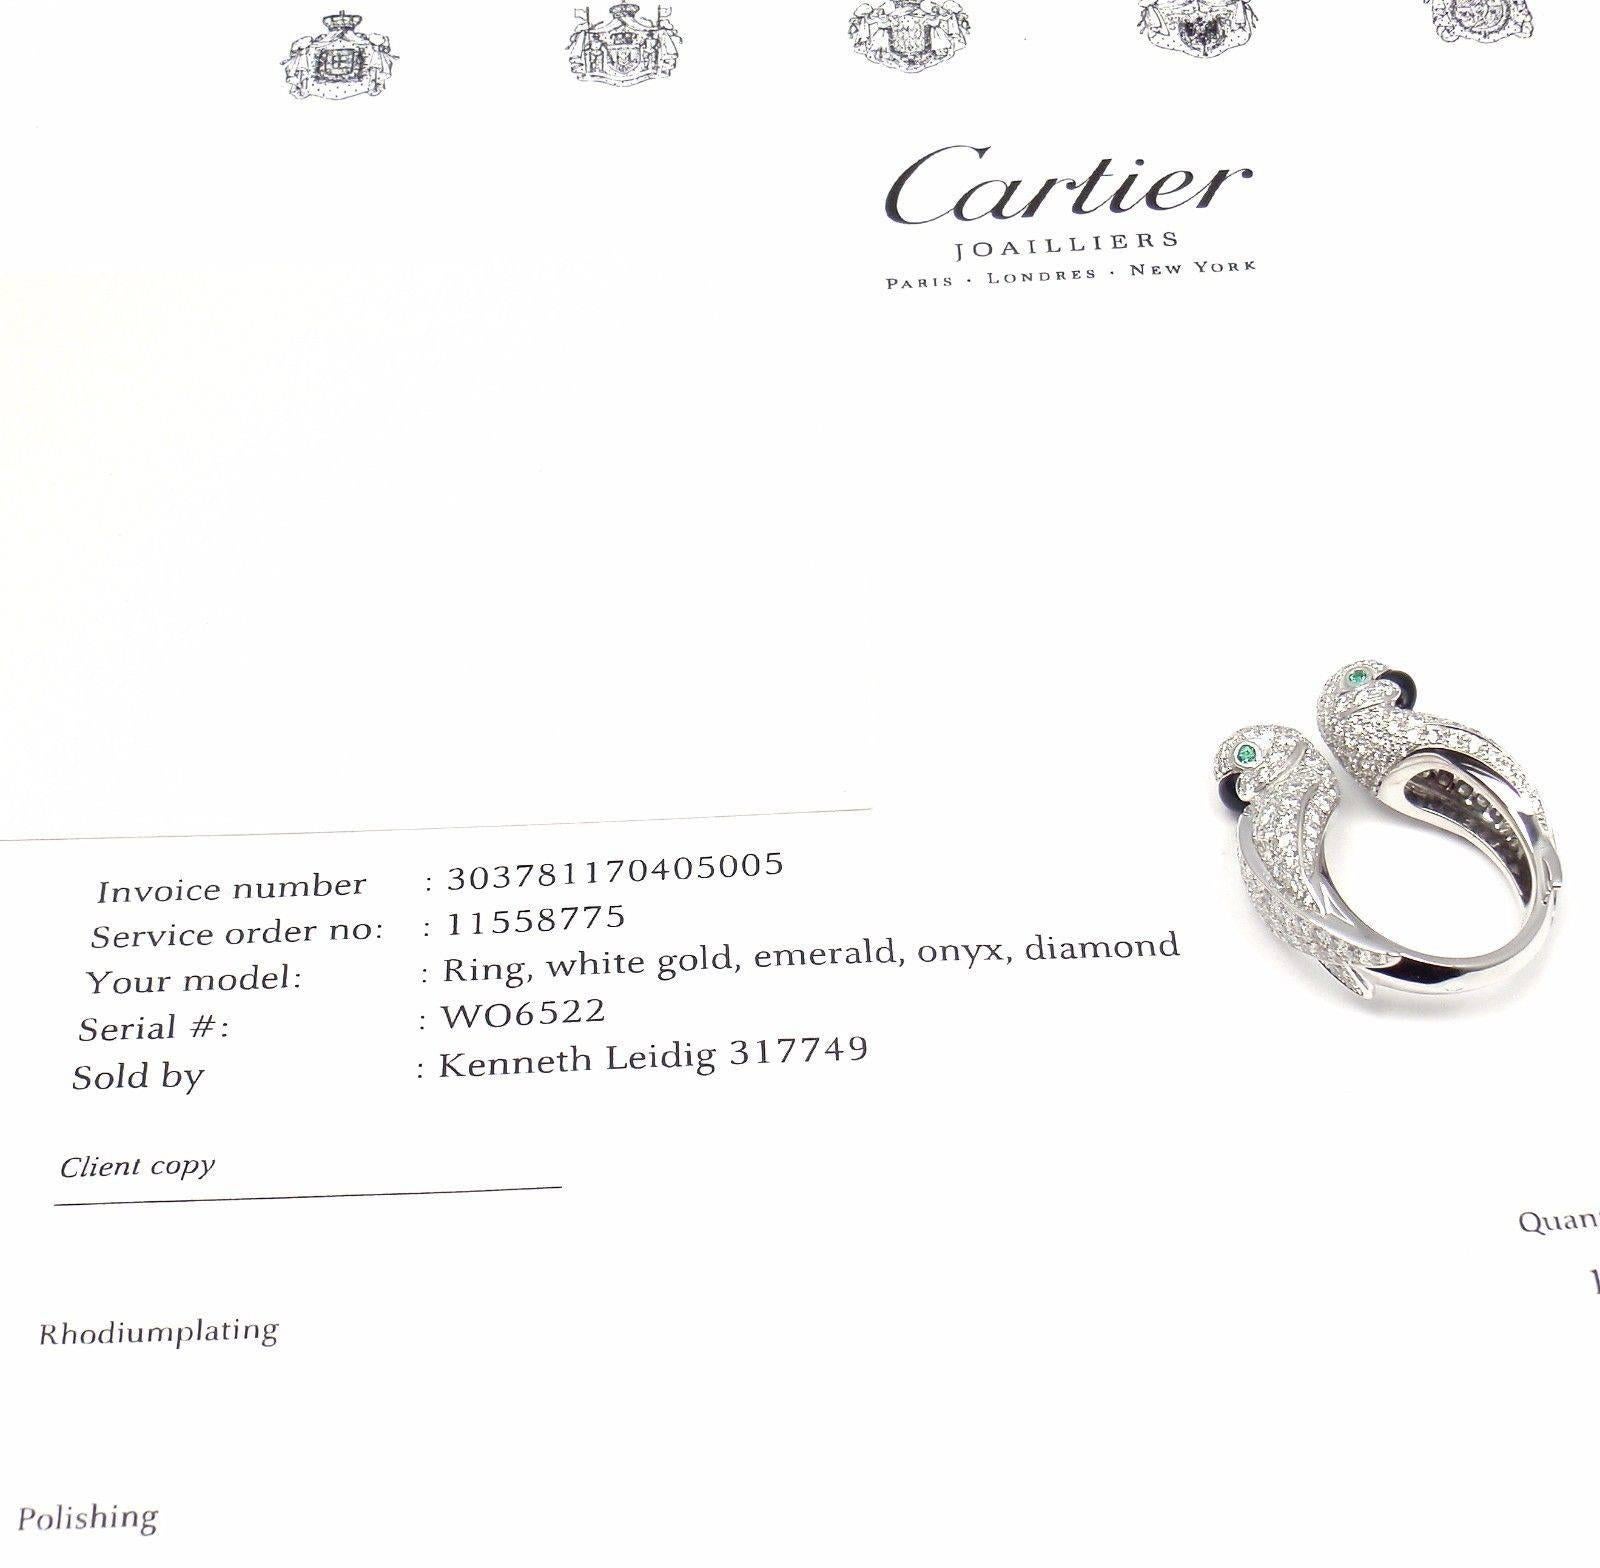 18k White Gold Les Oiseaux Libérés Love Birds Diamond, Emerald and Onyx Ring by Cartier. 
With Round brilliant cut diamonds VVS1 clarity, E color
2 round emeralds in the eyes
2 black onyx beaks
This ring comes with Cartier service paper from